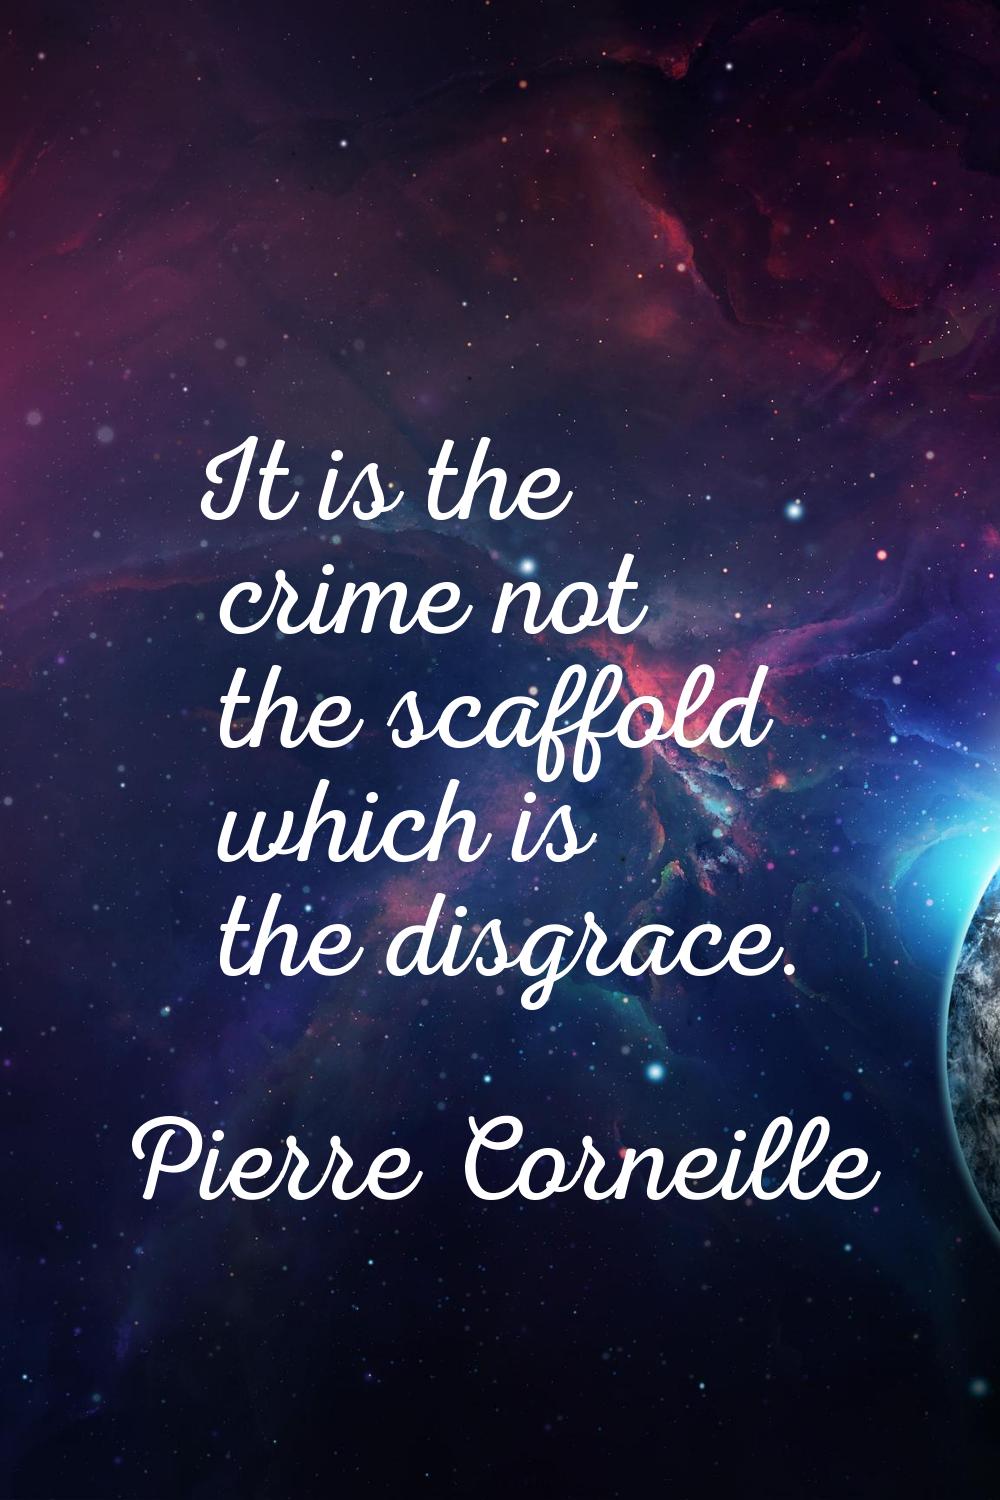 It is the crime not the scaffold which is the disgrace.